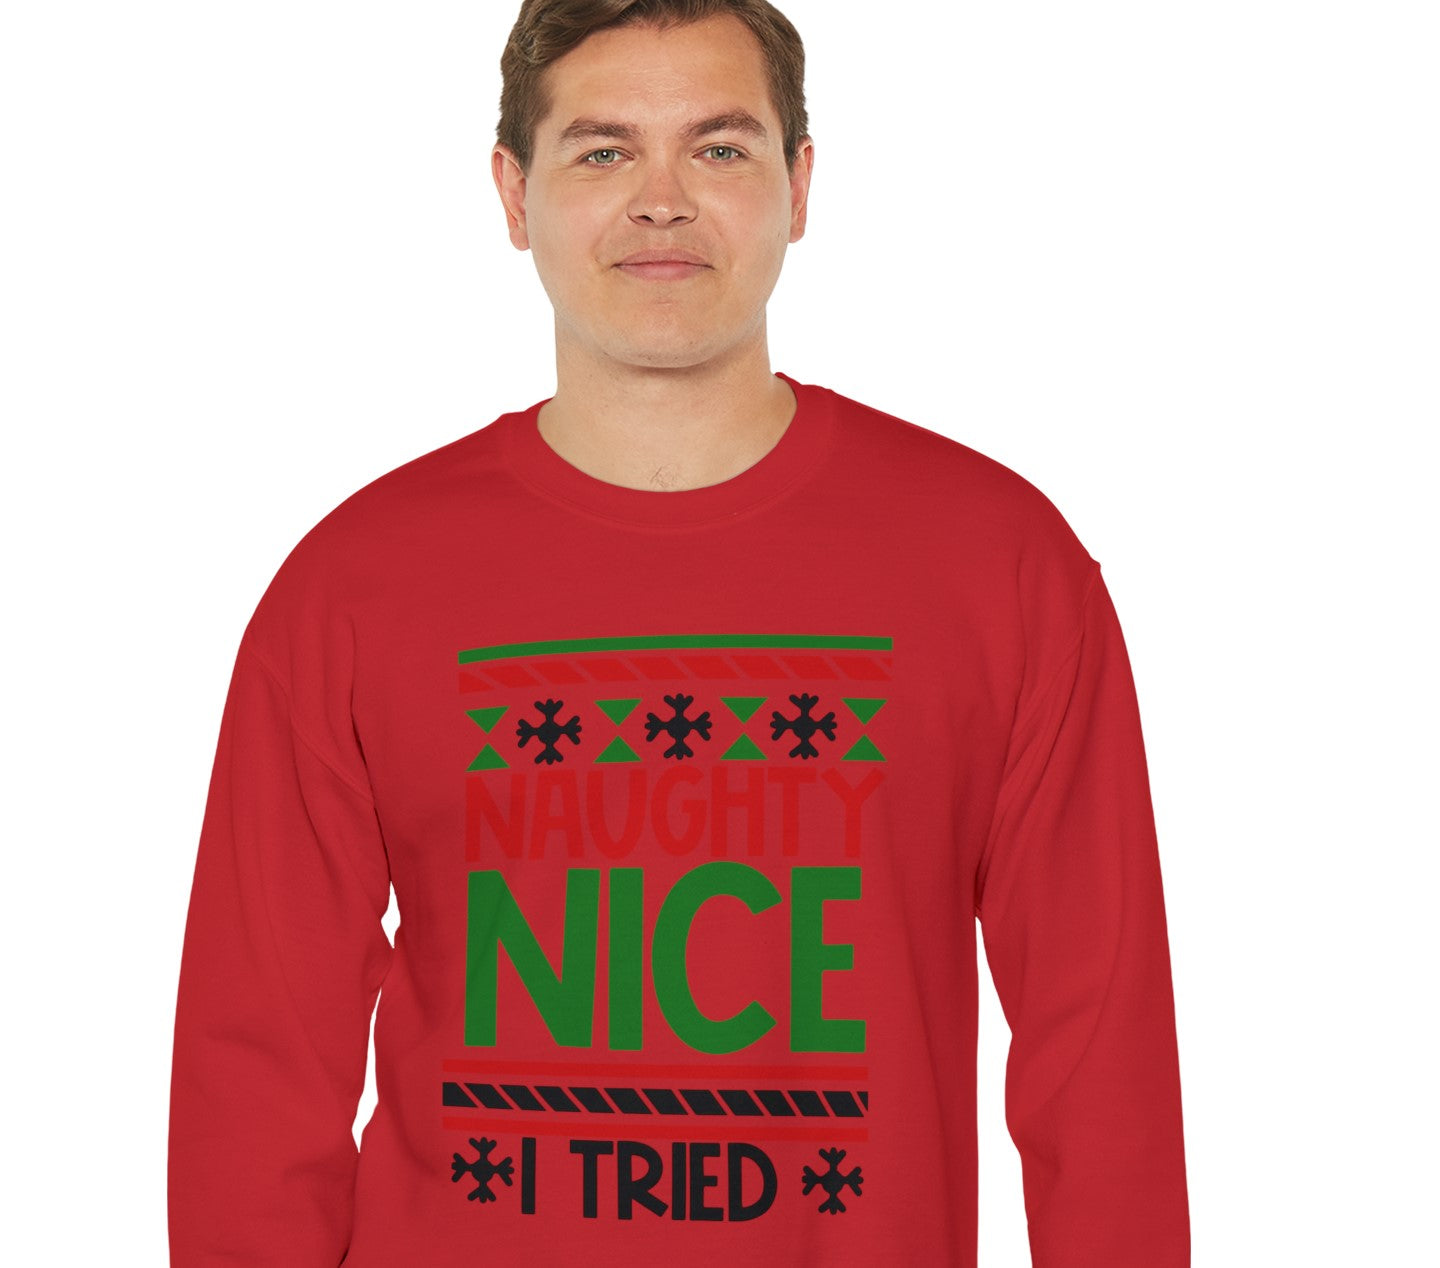 Get trendy with Naughty or Nice I tied ugly Christmas sweater - Sweatshirt available at Good Gift Company. Grab yours for $29.99 today!